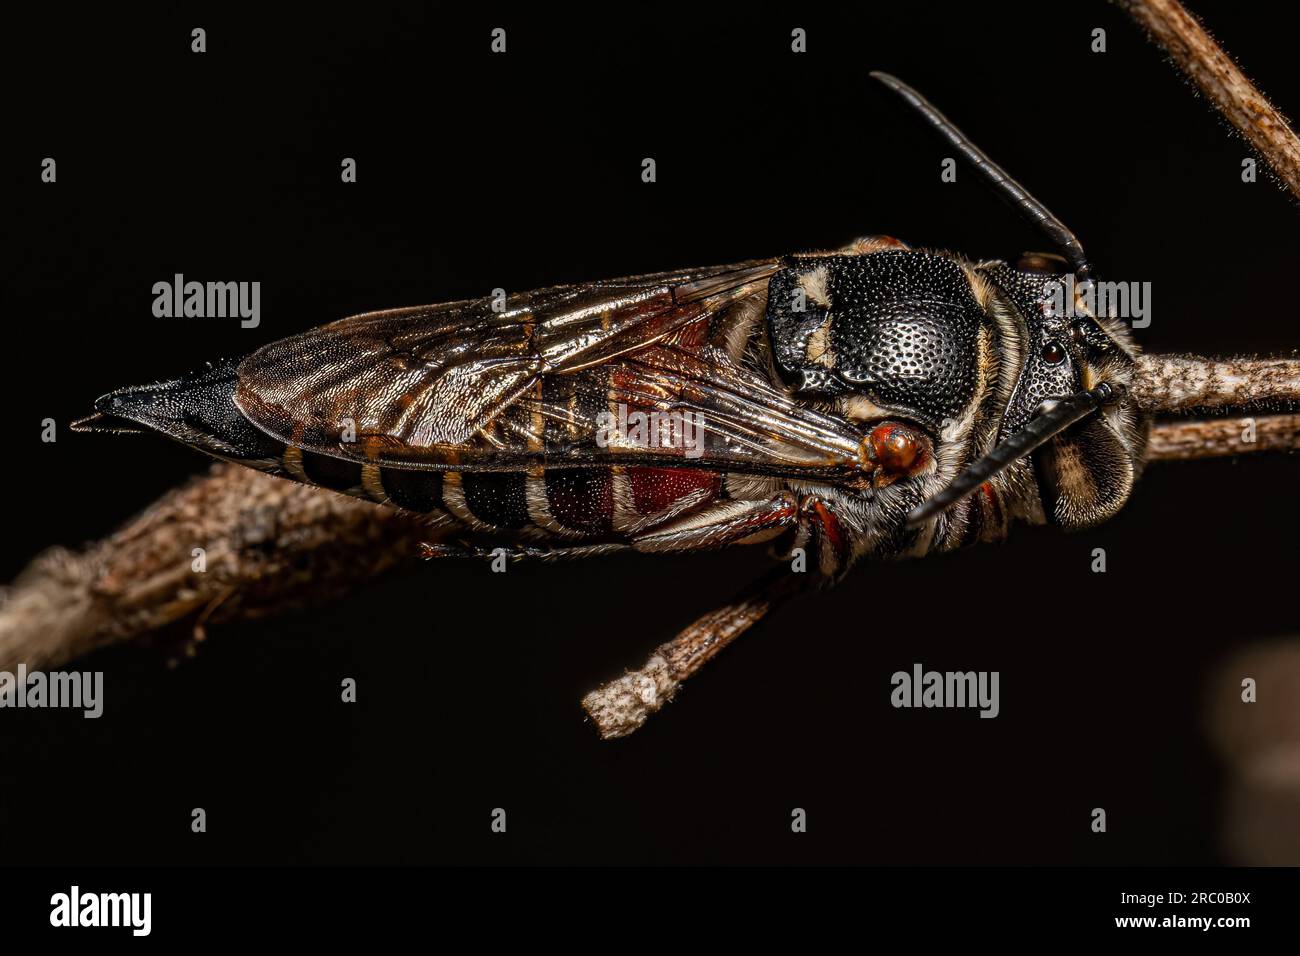 Adult Sharptail Bee of the Genus Coelioxys Stock Photo